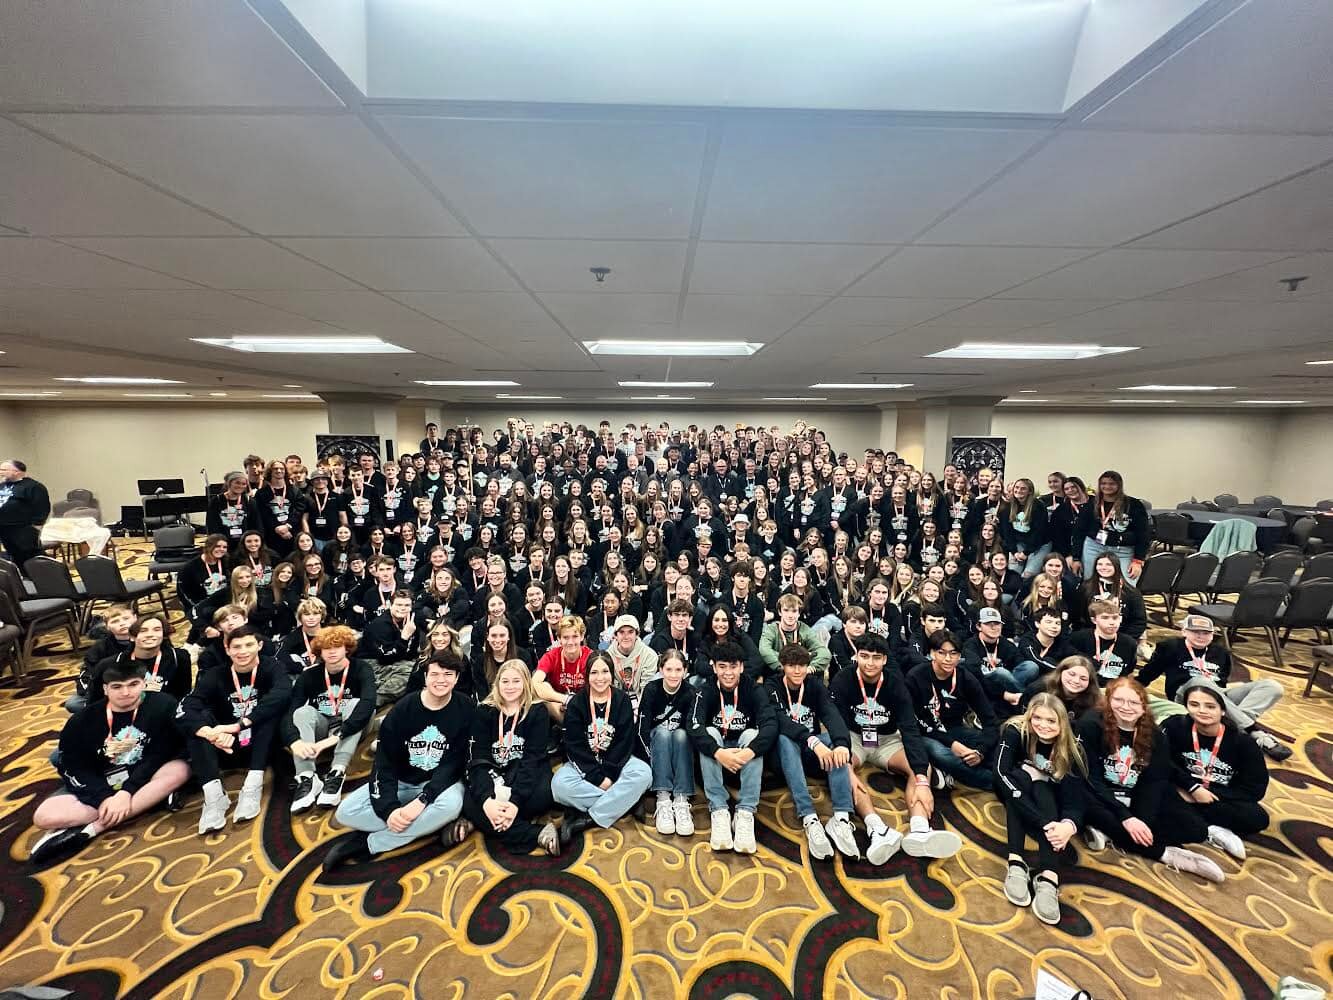 About 250 high school teens from the Jefferson City diocese gather for a photo with Bishop W. Shawn McKnight and several priests of the diocese on Nov. 17 during the National Catholic Youth Conference in Indianapolis.